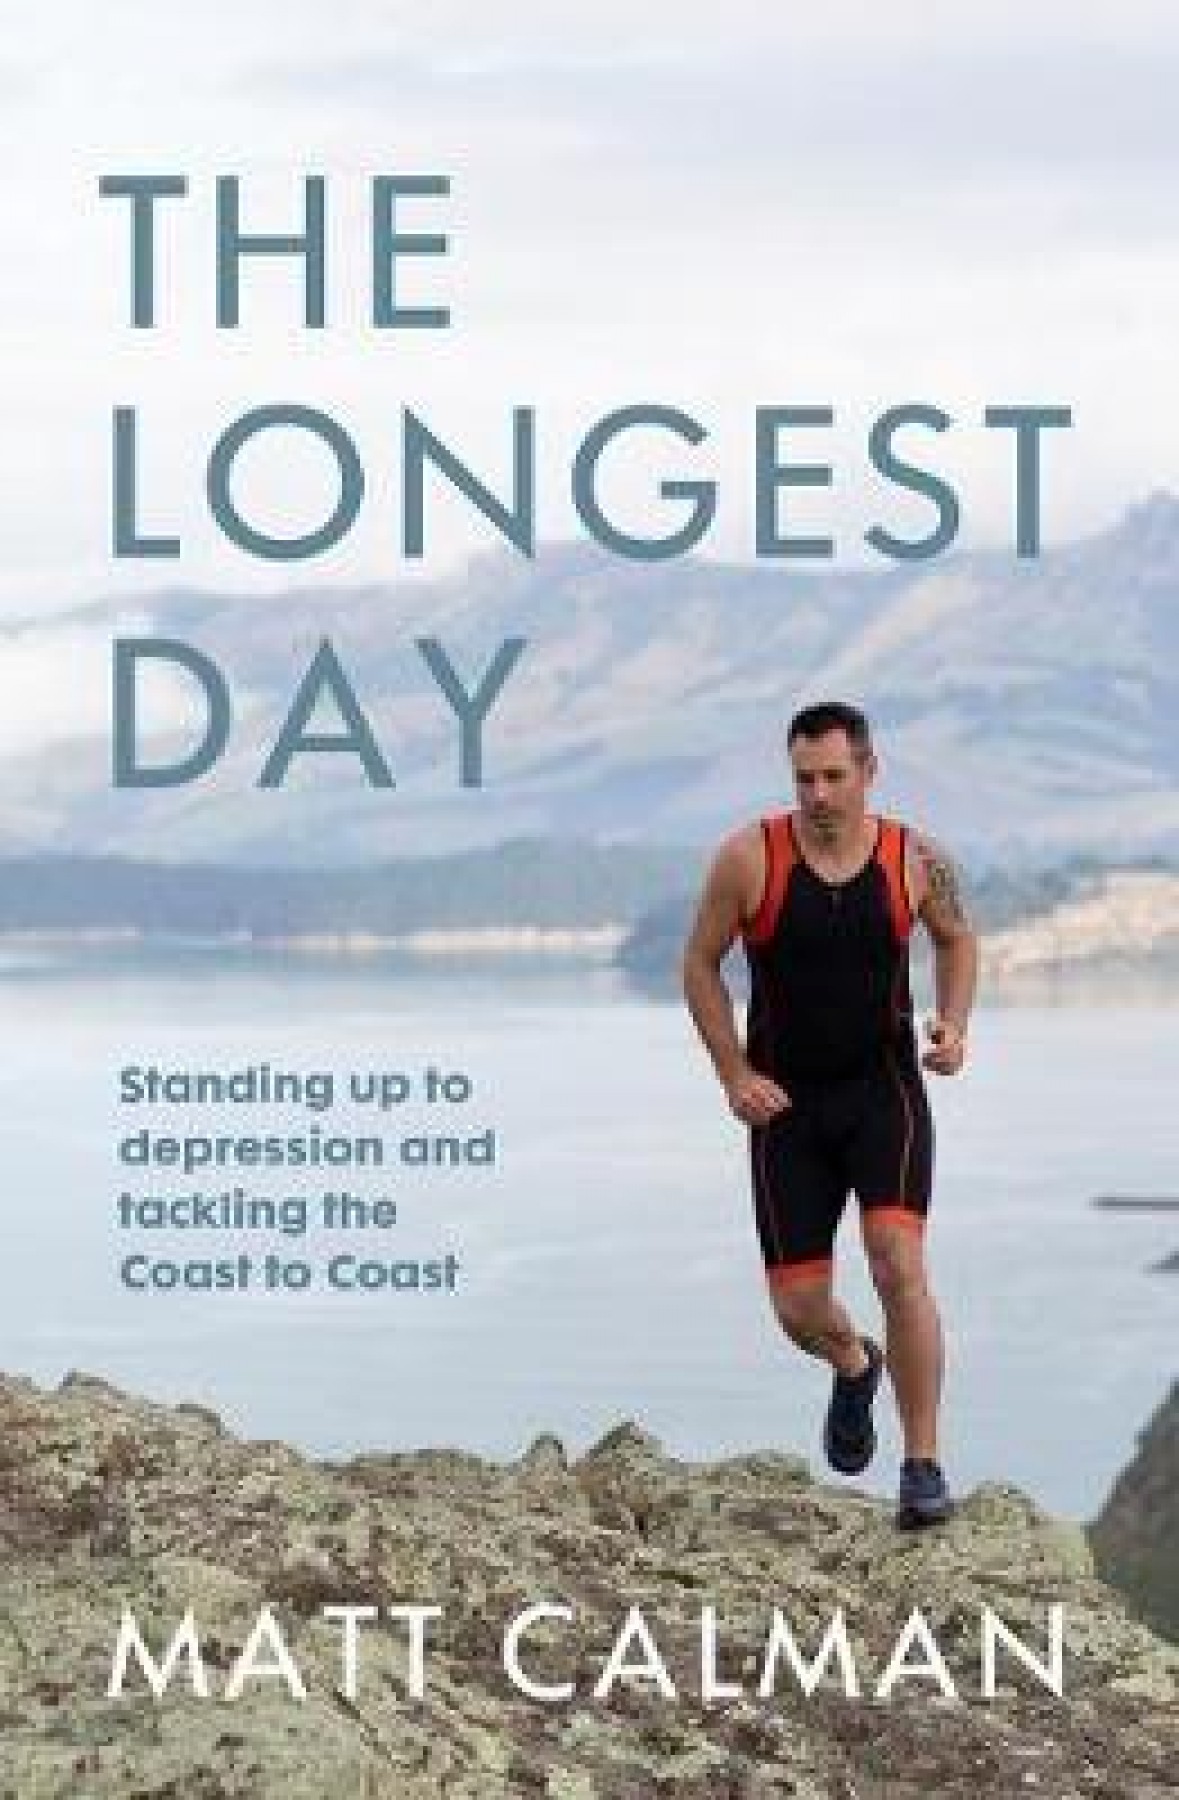 The longest day: Standing up to depression and tackling the Coast to Coast